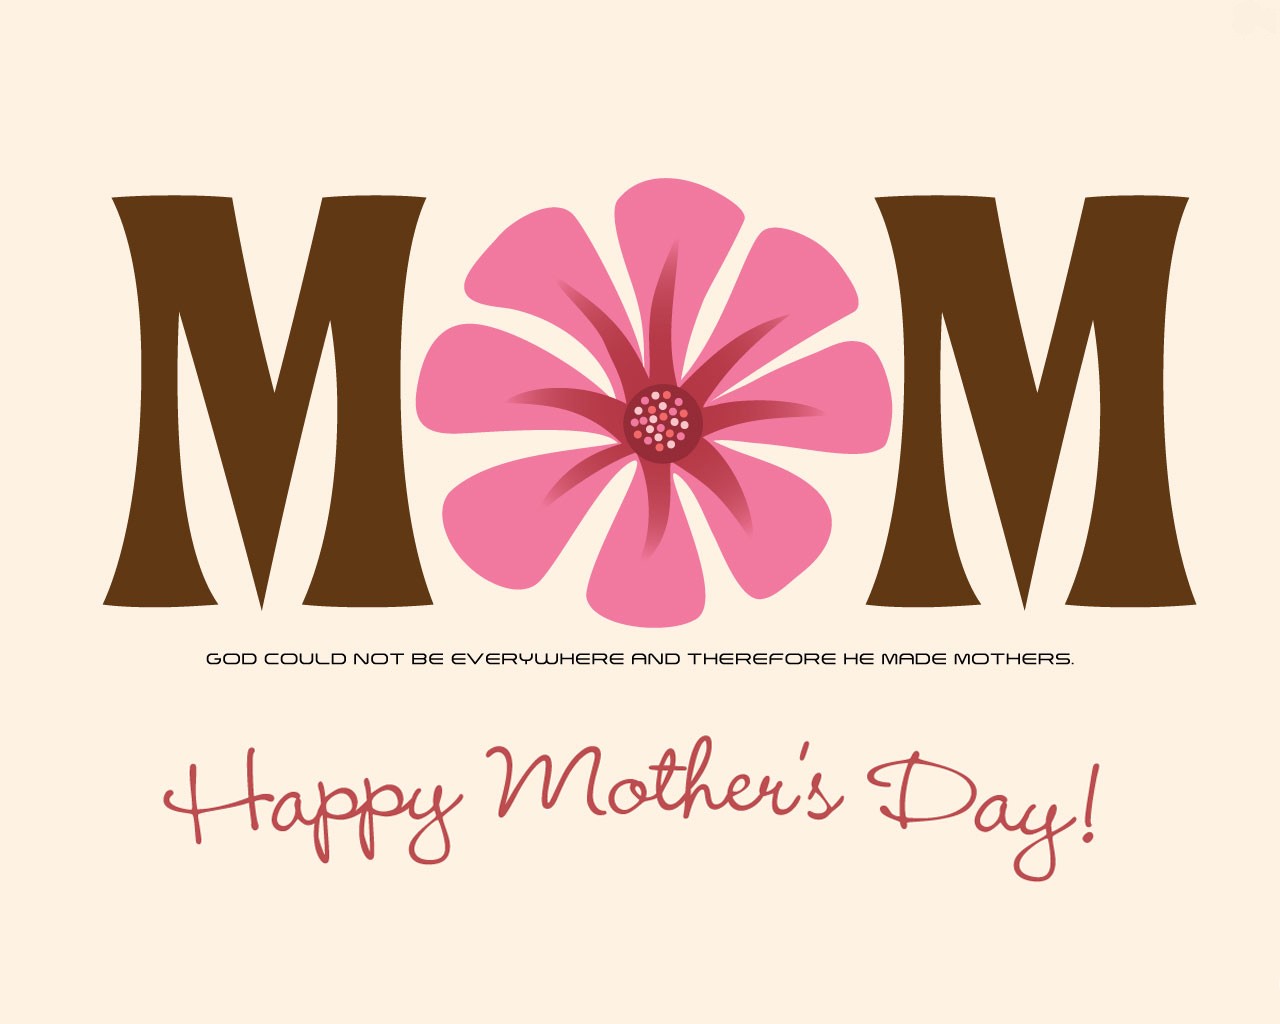 God Could Not Be Everywhere And Therefore He Made Mothers Happy Mother’s Day